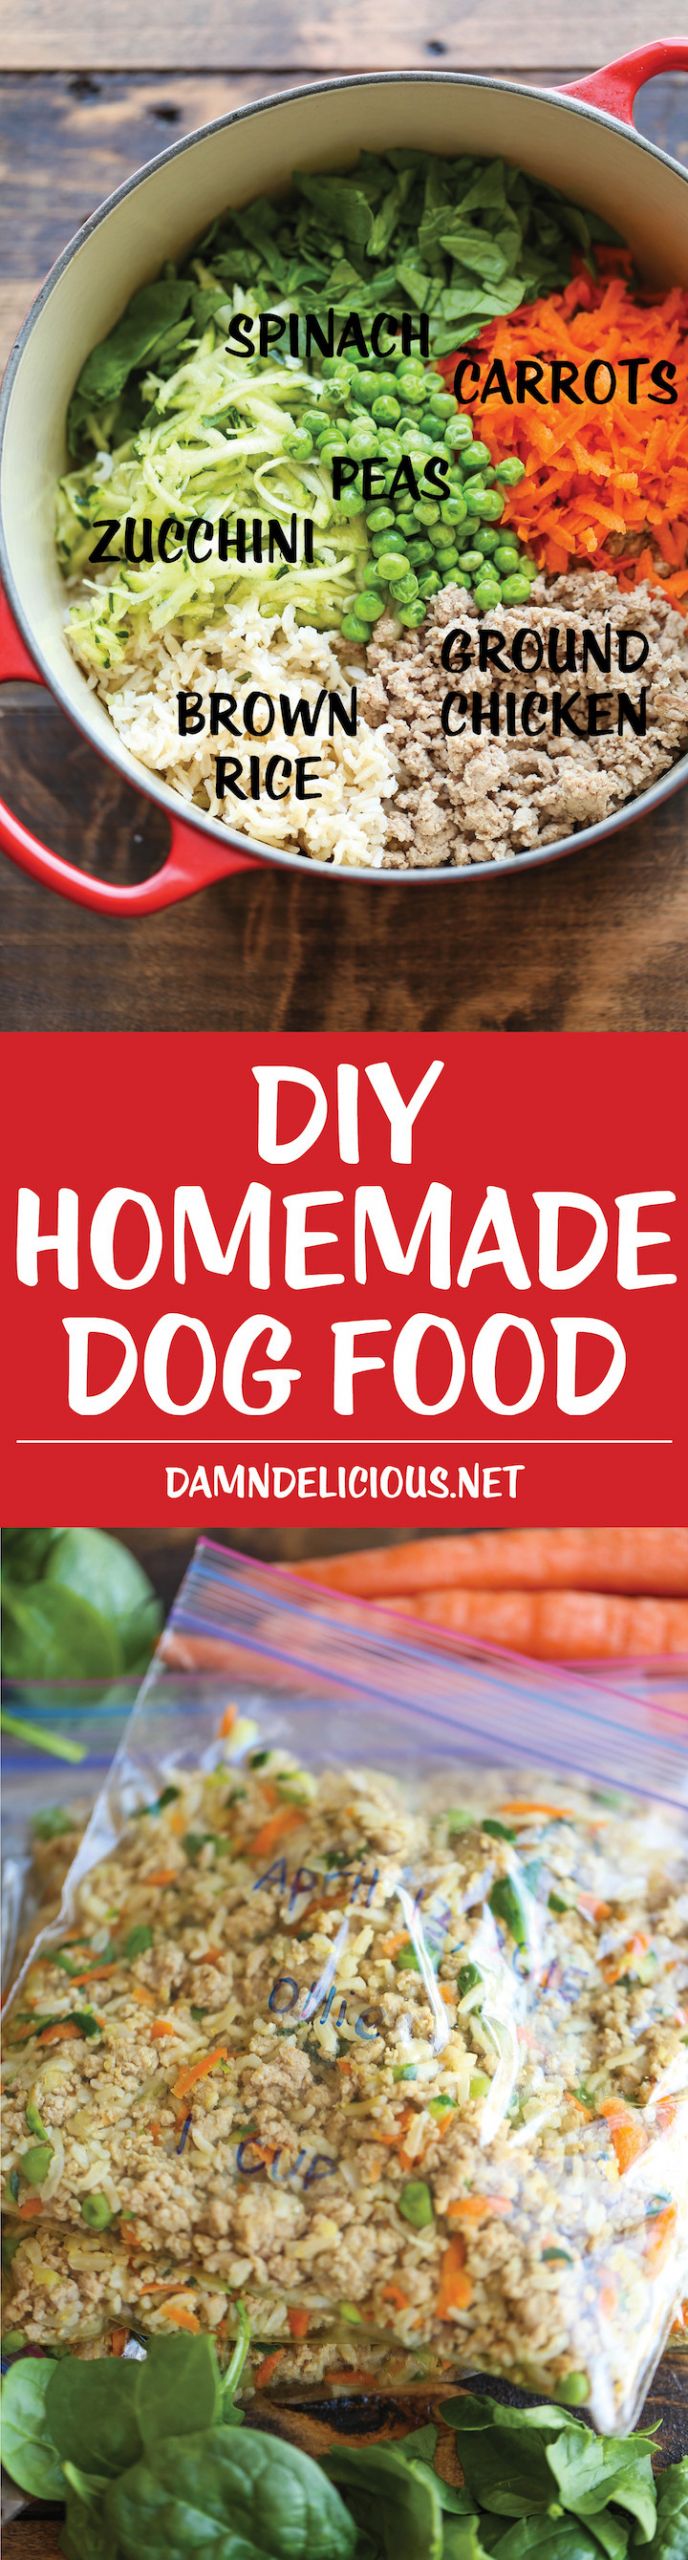 Healthy Dog Snacks
 21 Healthy Homemade Dog Food and Treat Recipes Perfect for